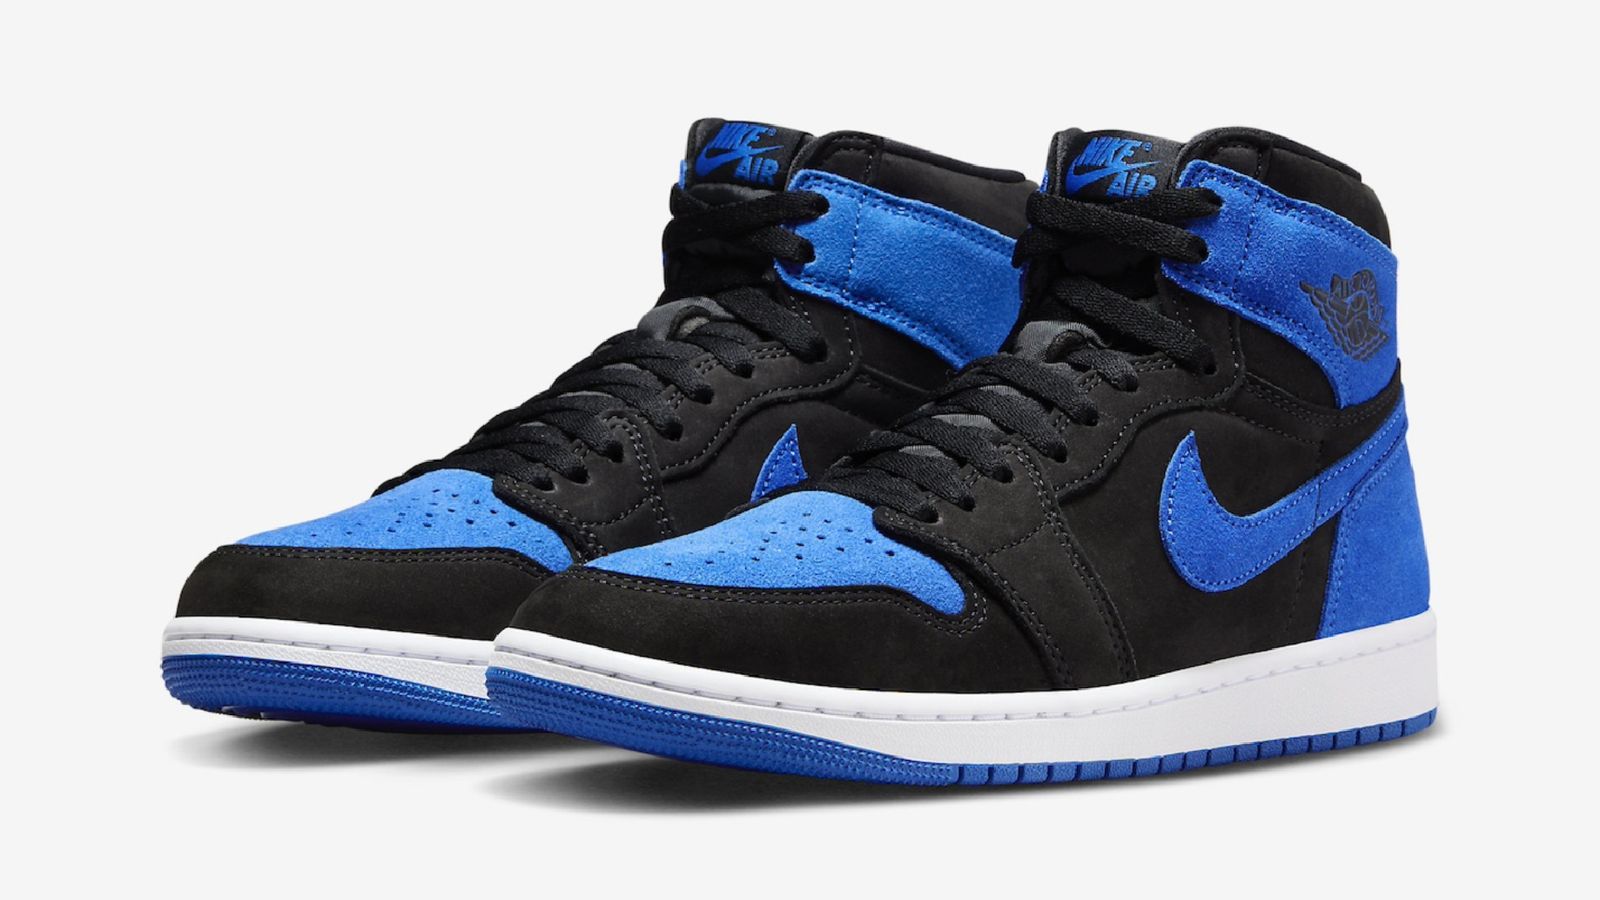 Air Jordan 1 High "Royal Reimagined" product image of a pair of black and blue high-tops with white midsoles.